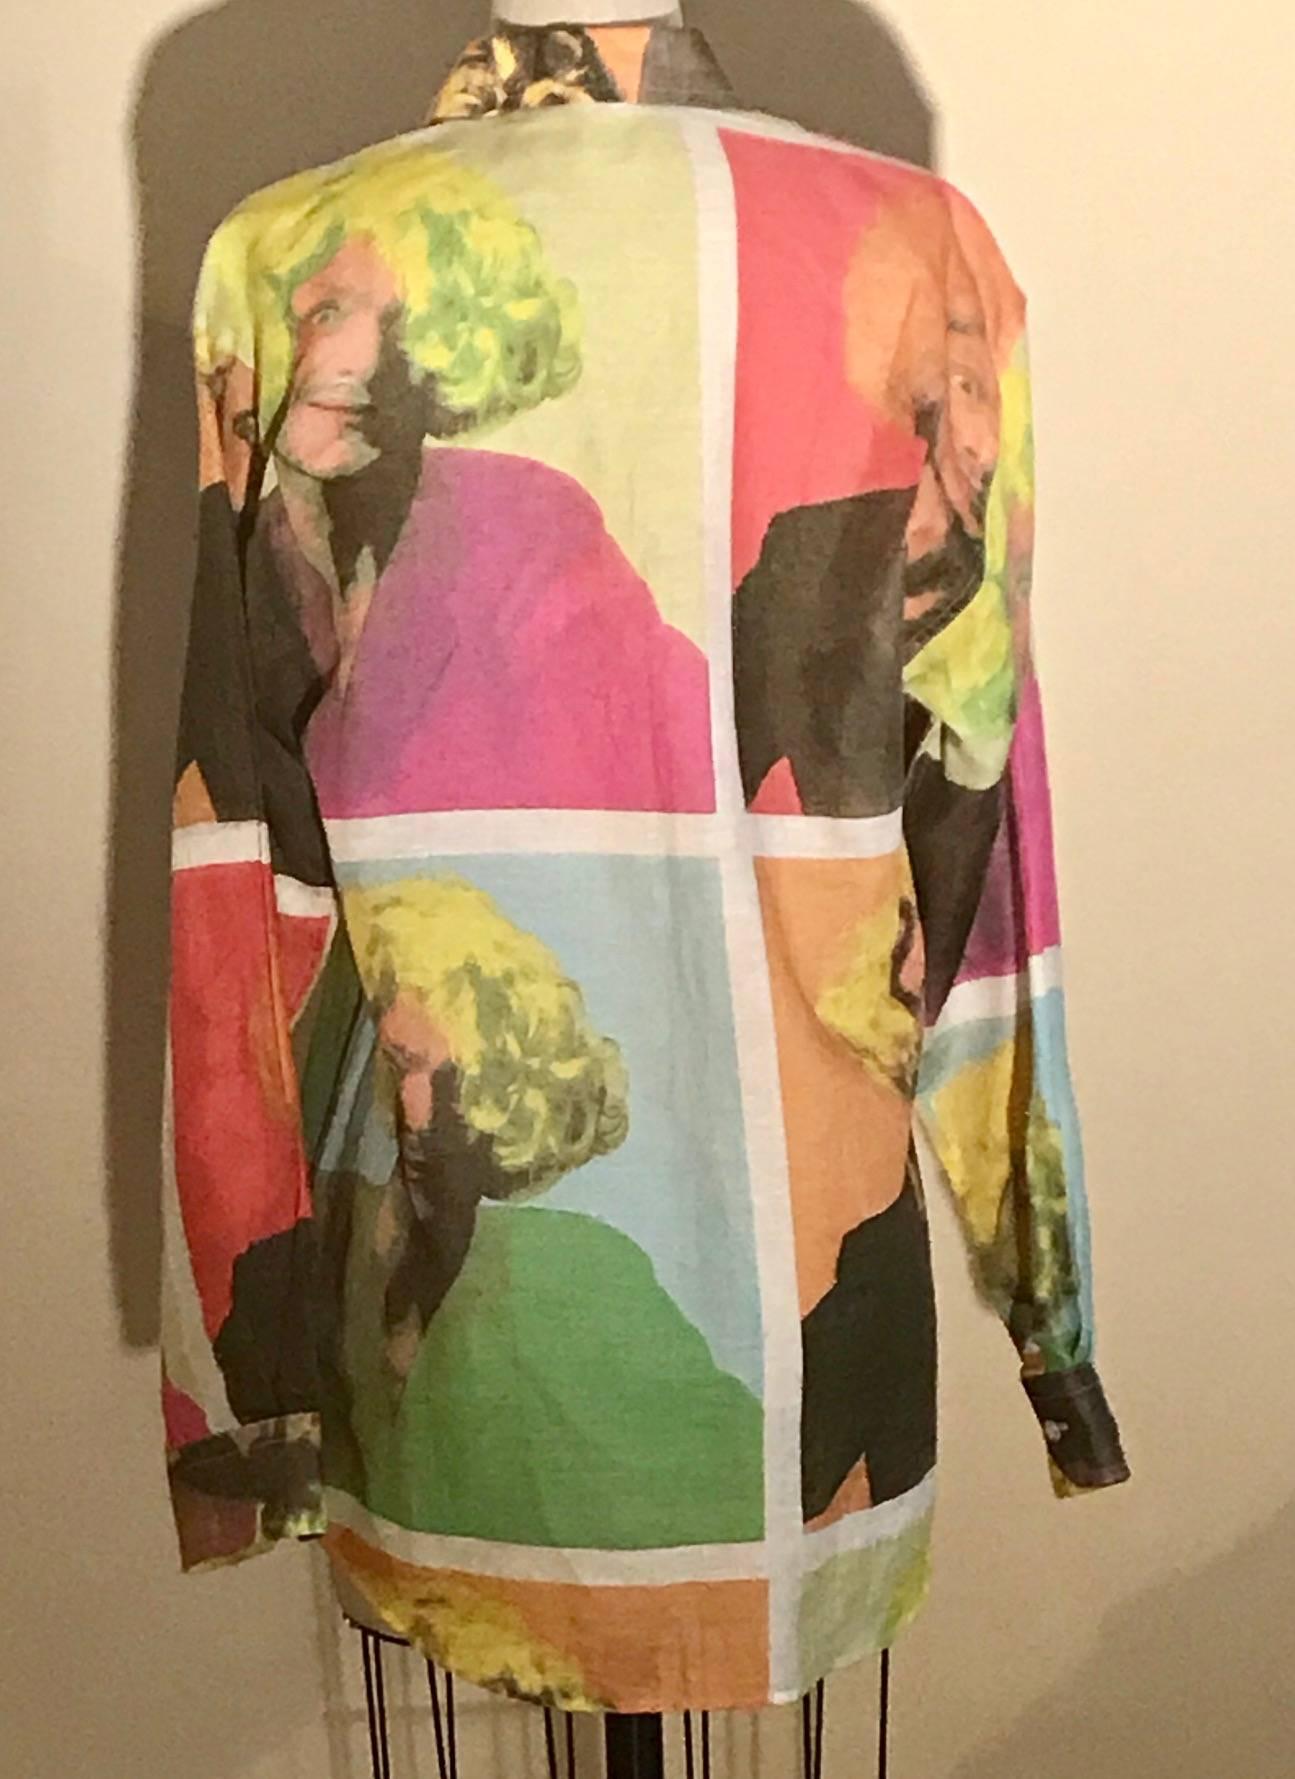 Moschino Cheap & Chic vintage 1990s button up collared shirt in 'It's Fun to Be Bananas' print, featuring a photo portrait of Franco Moschino wearing a silly yellow wig, printed in multicolored repetition a la Warhol. 

52% linen, 48% cotton.

Men's